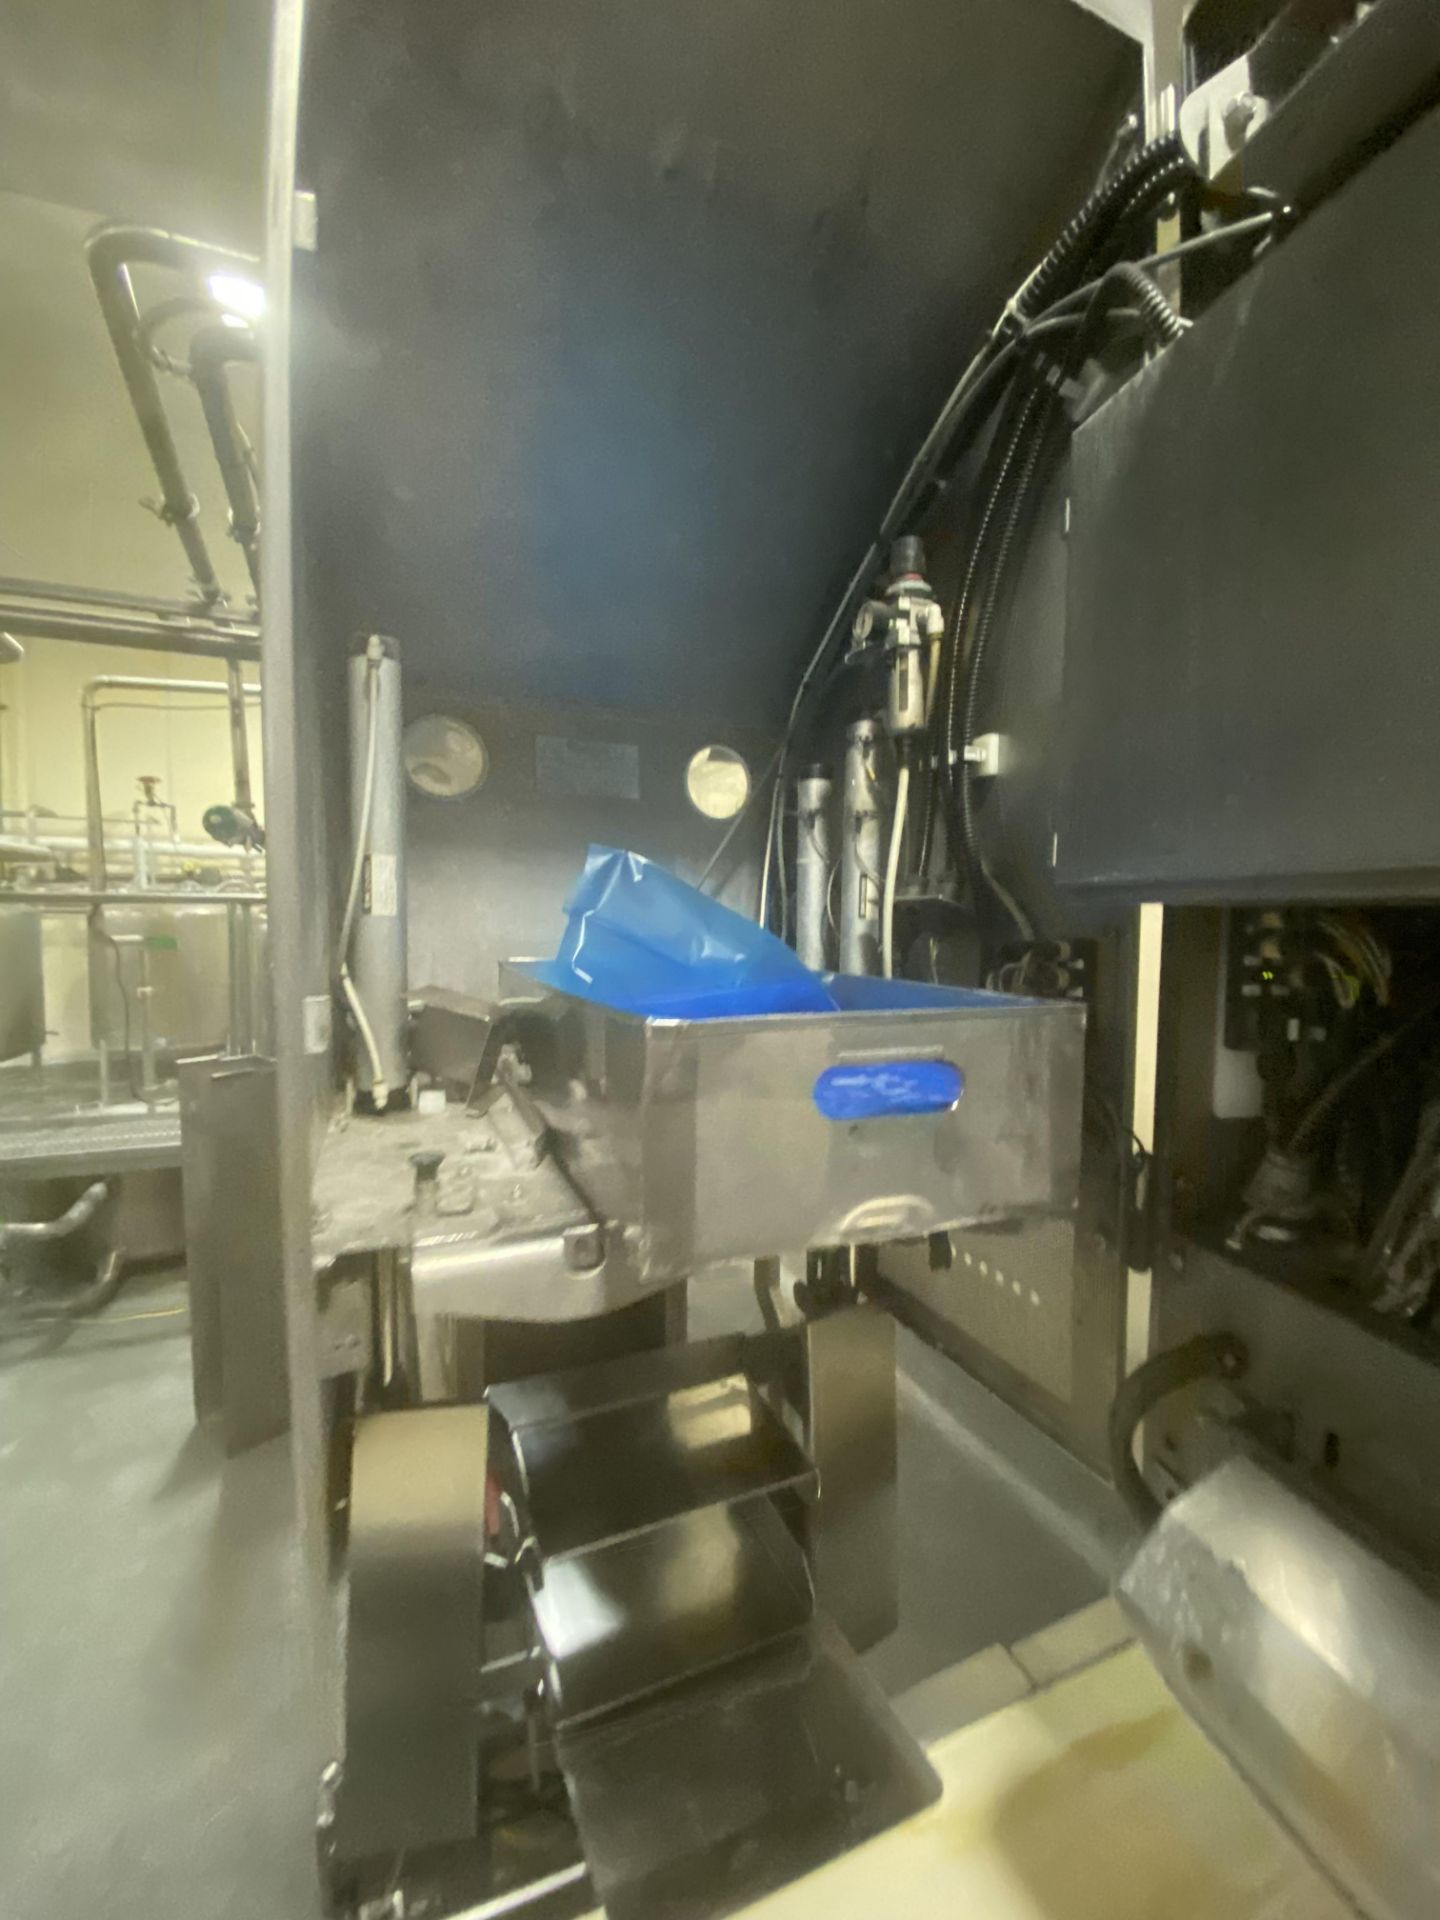 Stoelting (Relco)S/S Cheese Blocker with Cyrovac CL20 Bagger, M/N C120, S/N 01102, with - Image 4 of 11